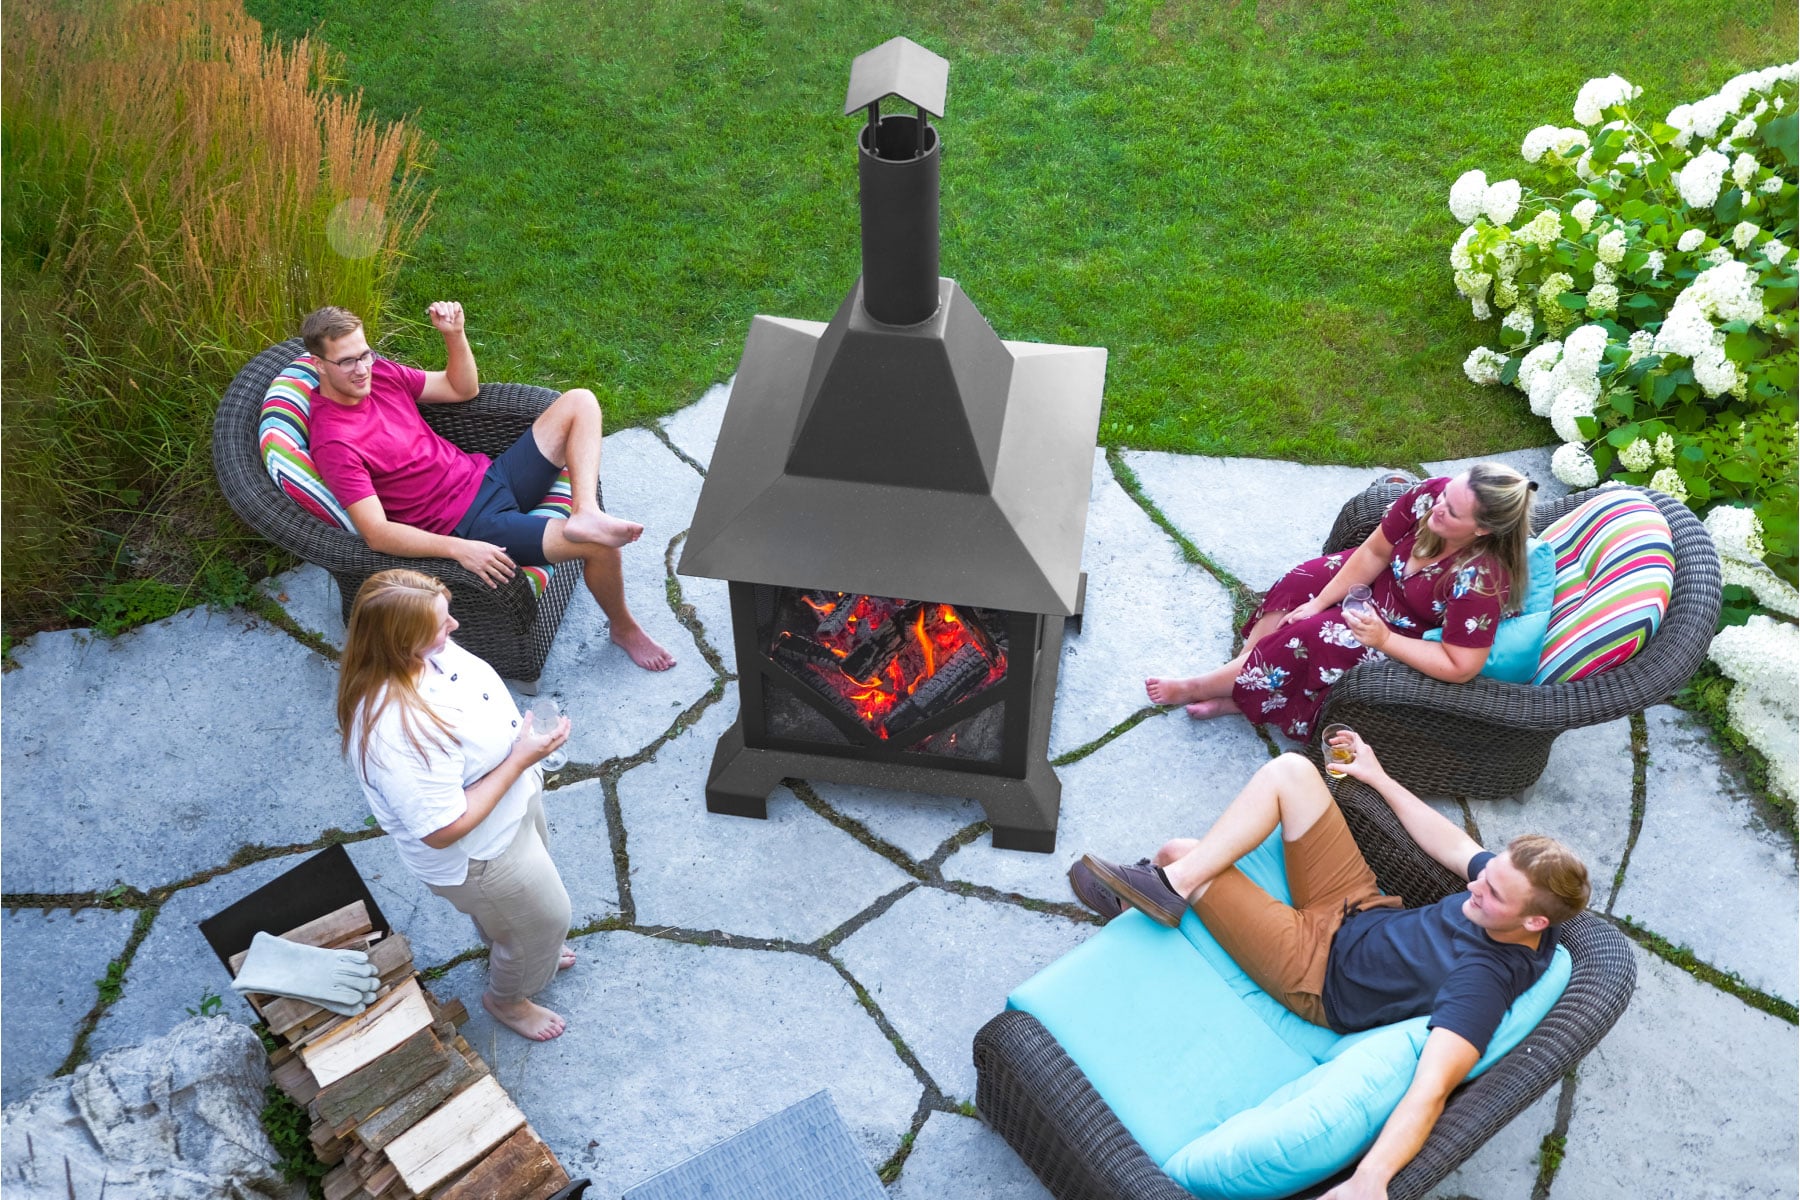 Friends gathered around large 7 foot tall chiminea fire pit